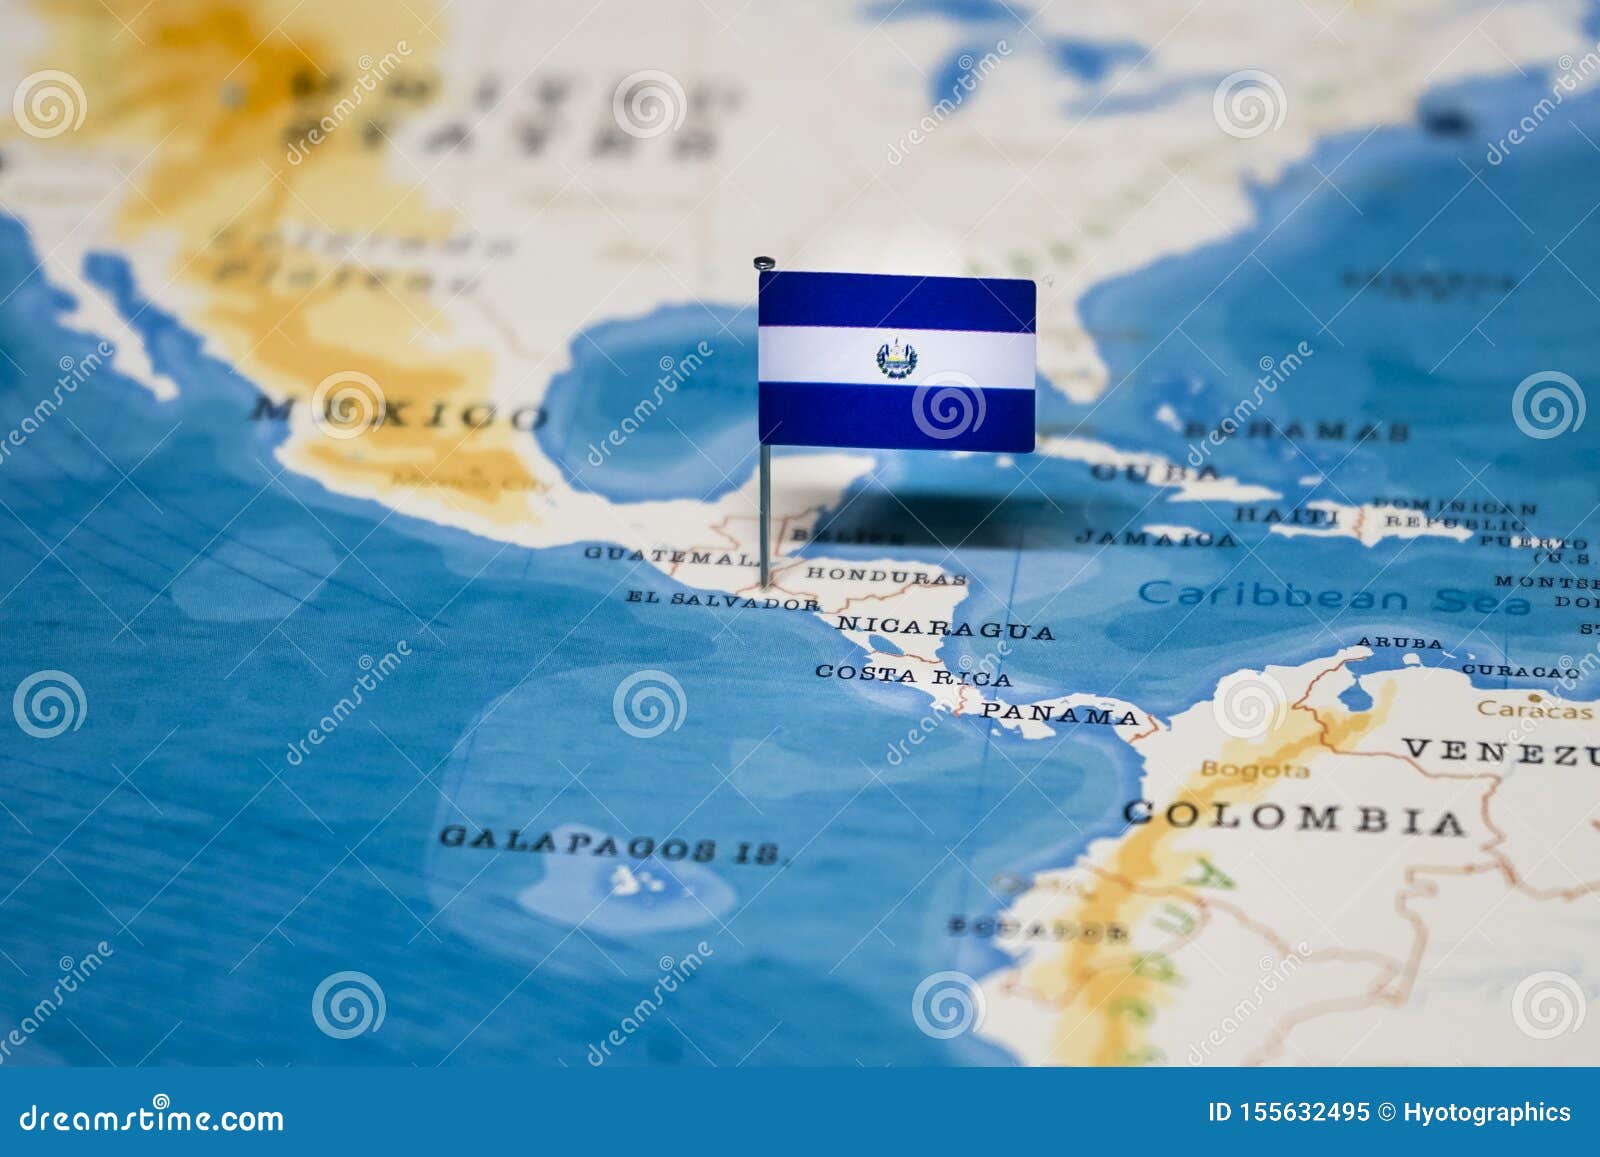 the flag of el salvador in the world map